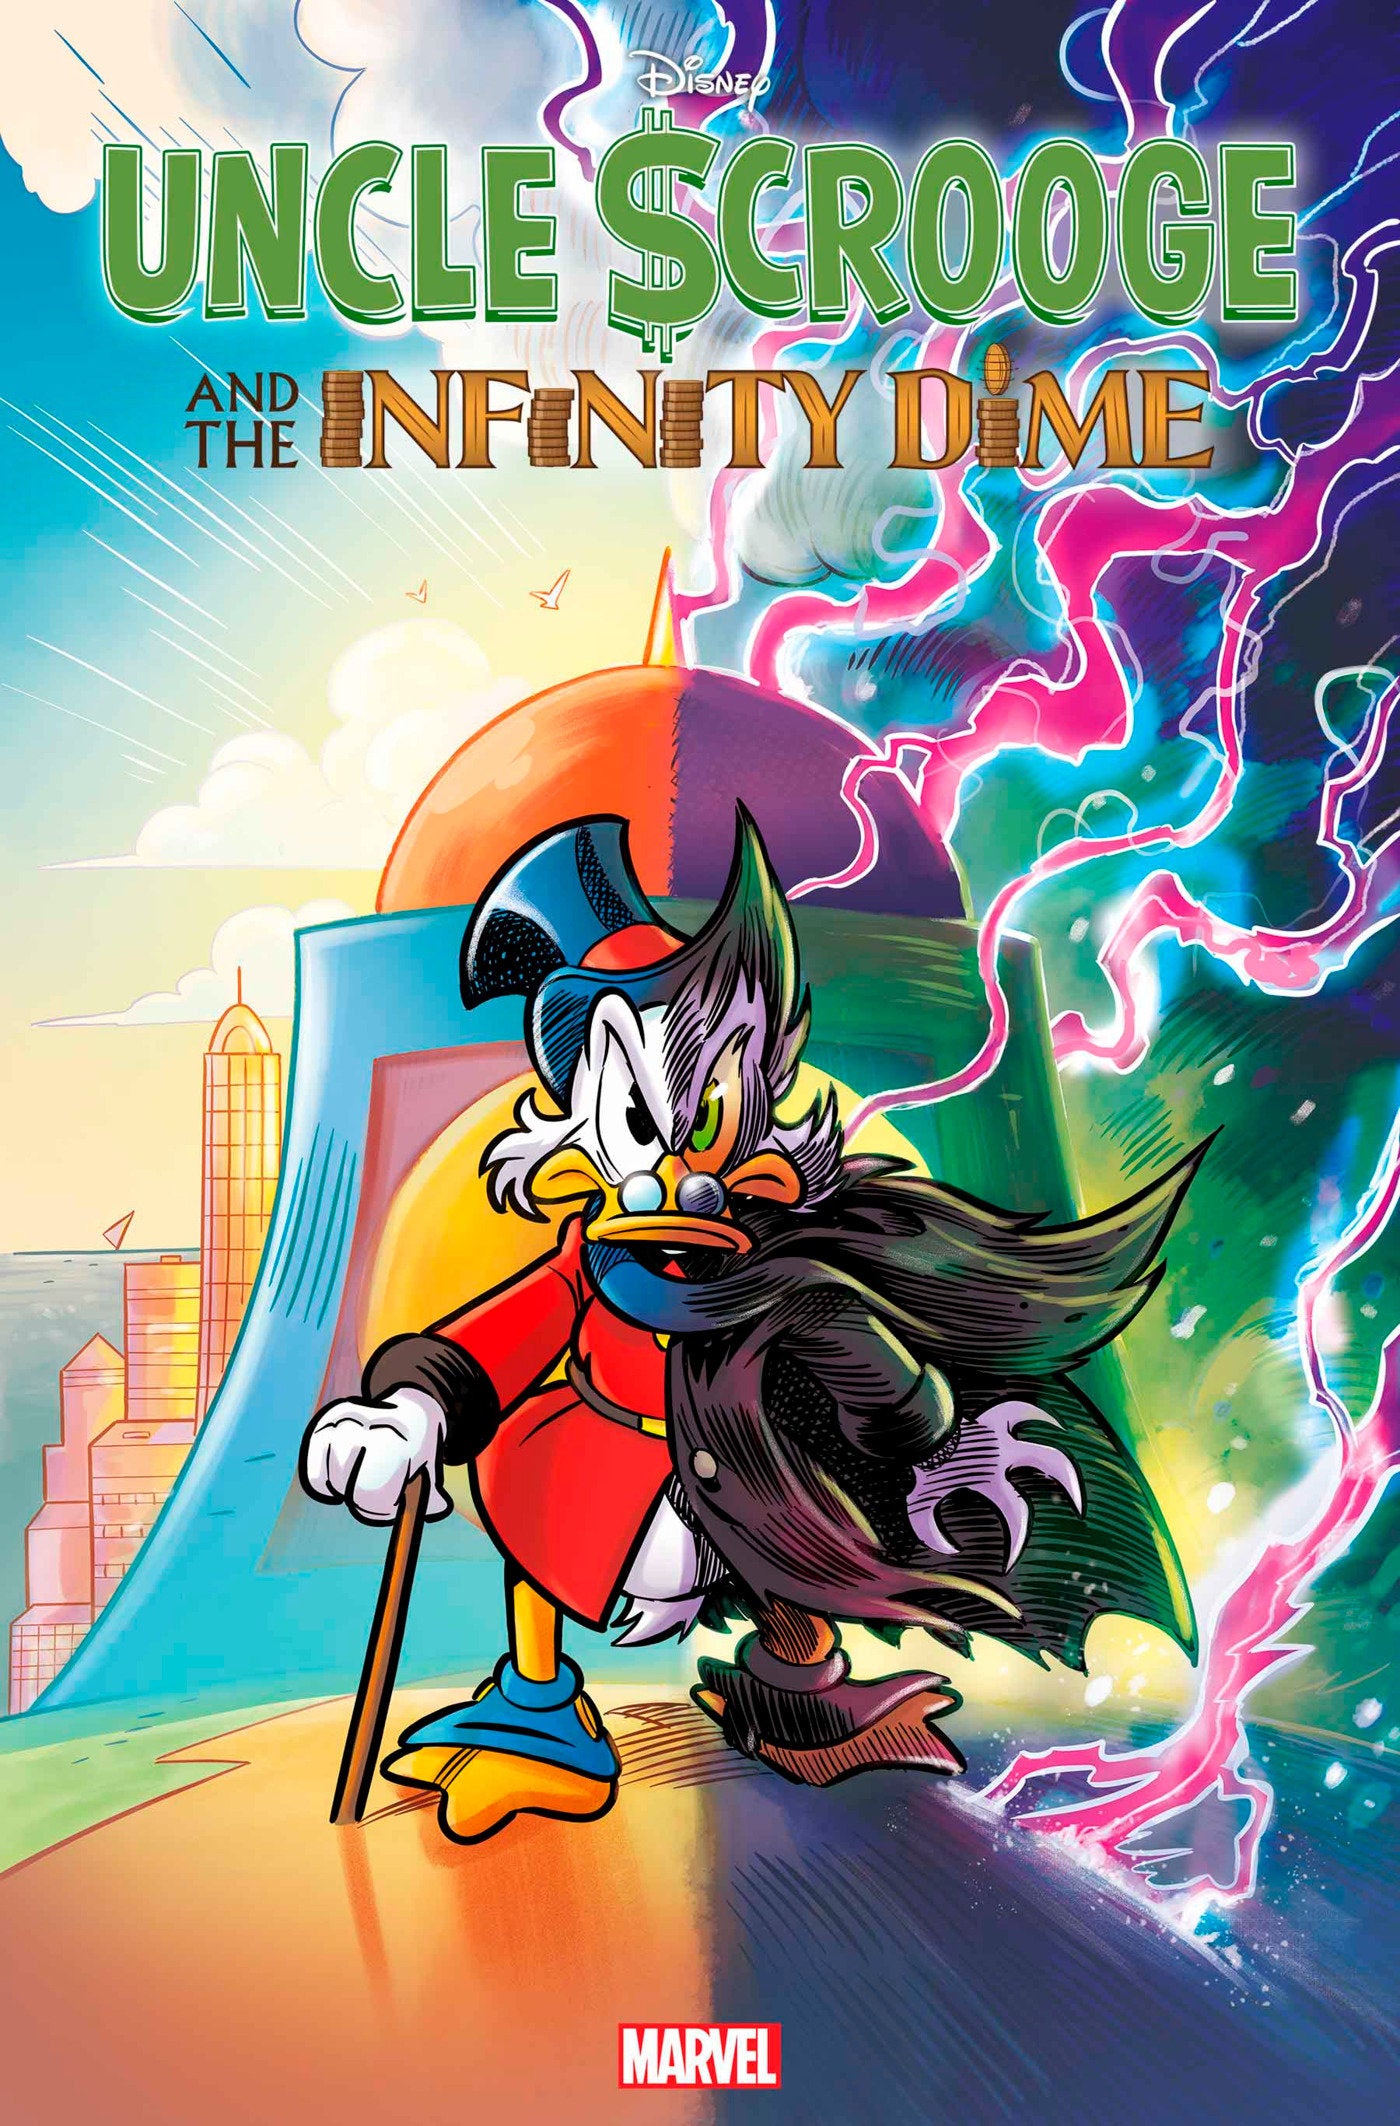 UNCLE SCROOGE AND THE INFINITY DIME #1 LORENZO PASTROVICCHIO COVER B